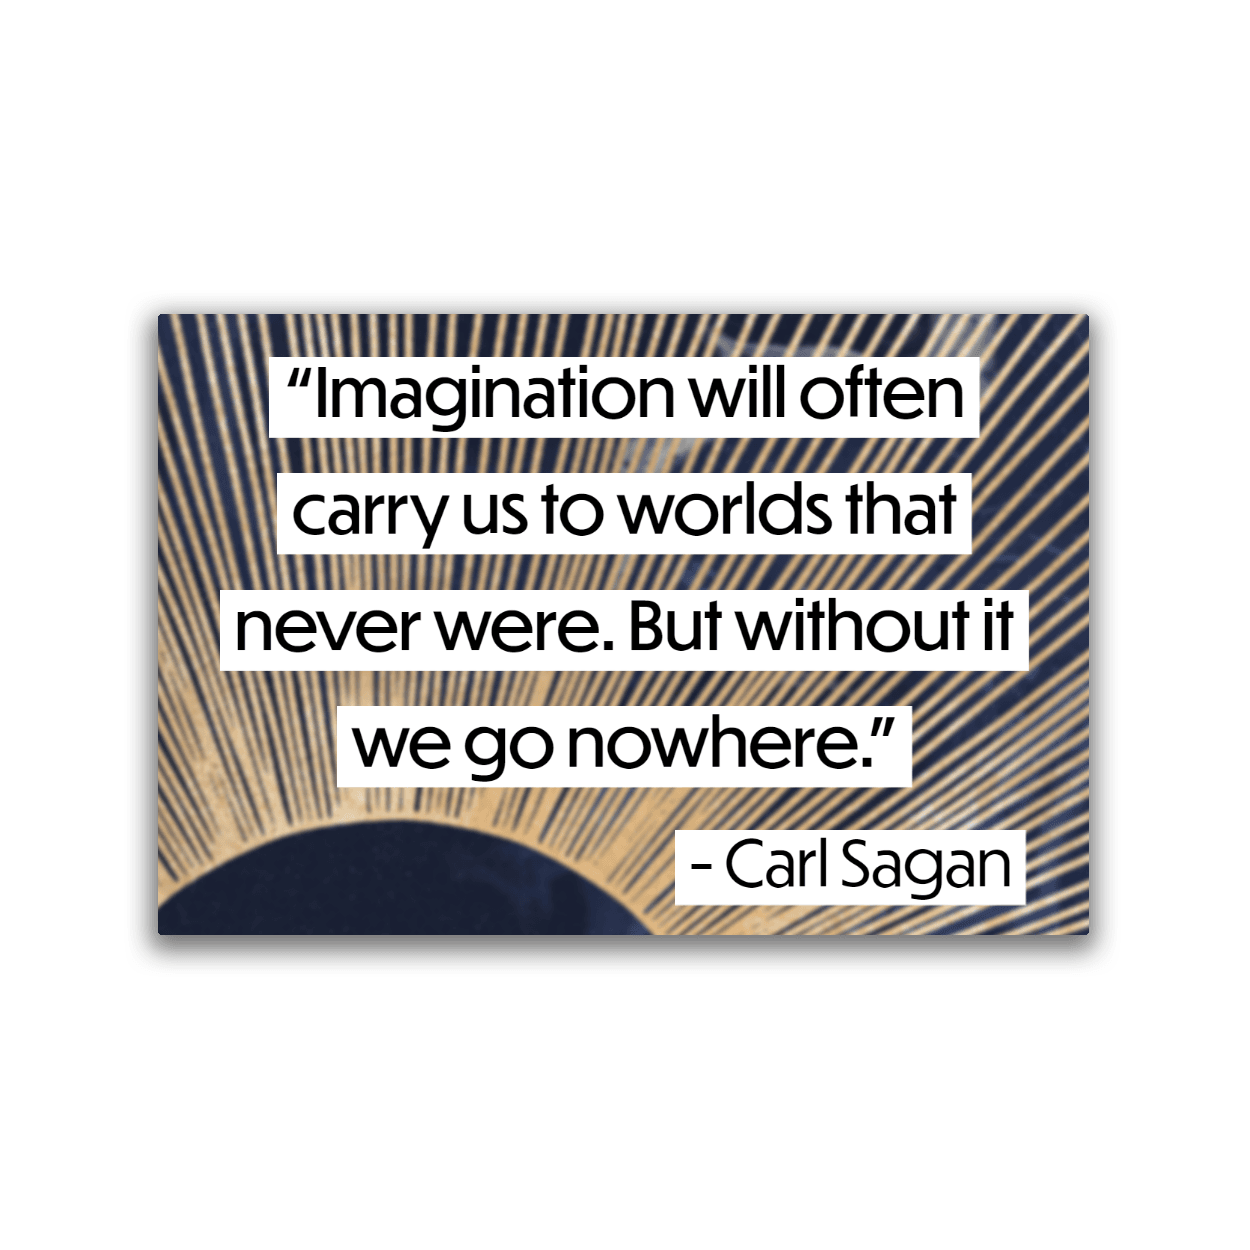 Image of a 2x3 magnet with a Carl Sagan quote